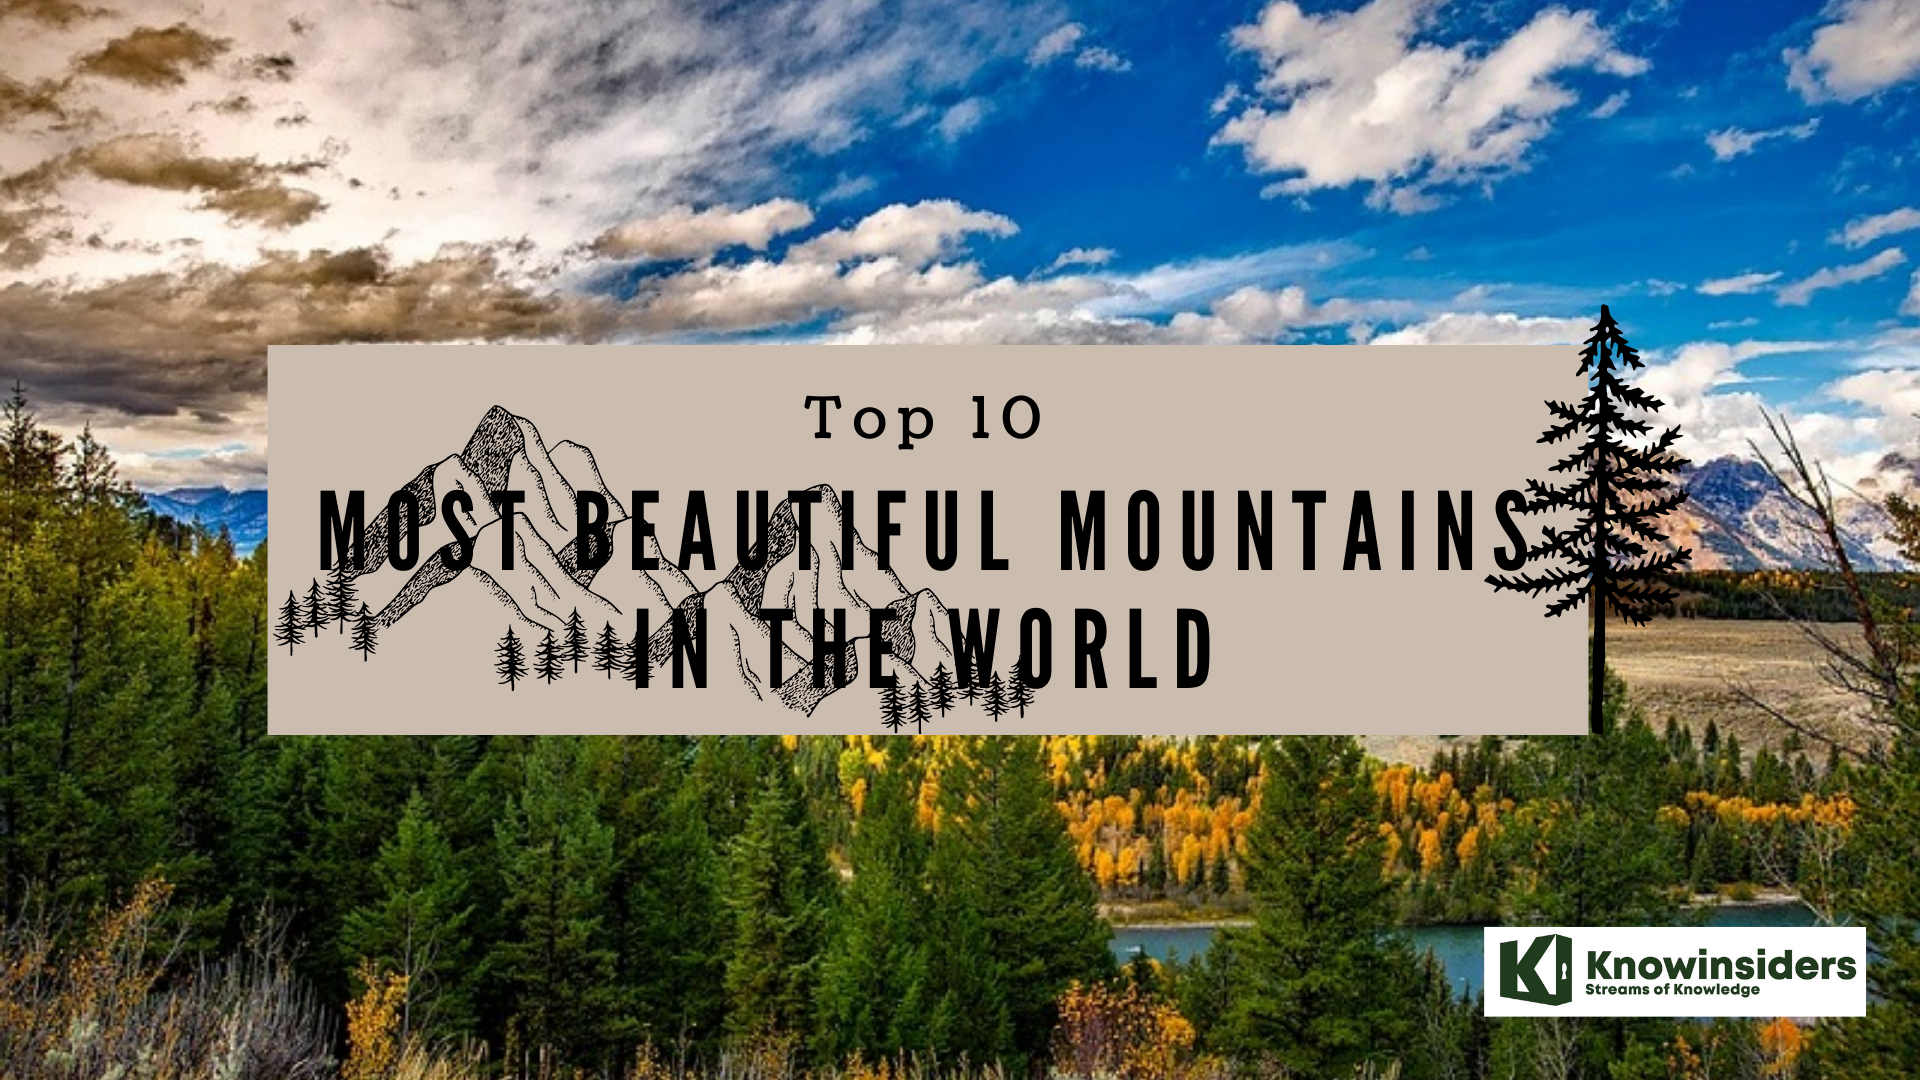 Top 10 most beautiful mountains in the world